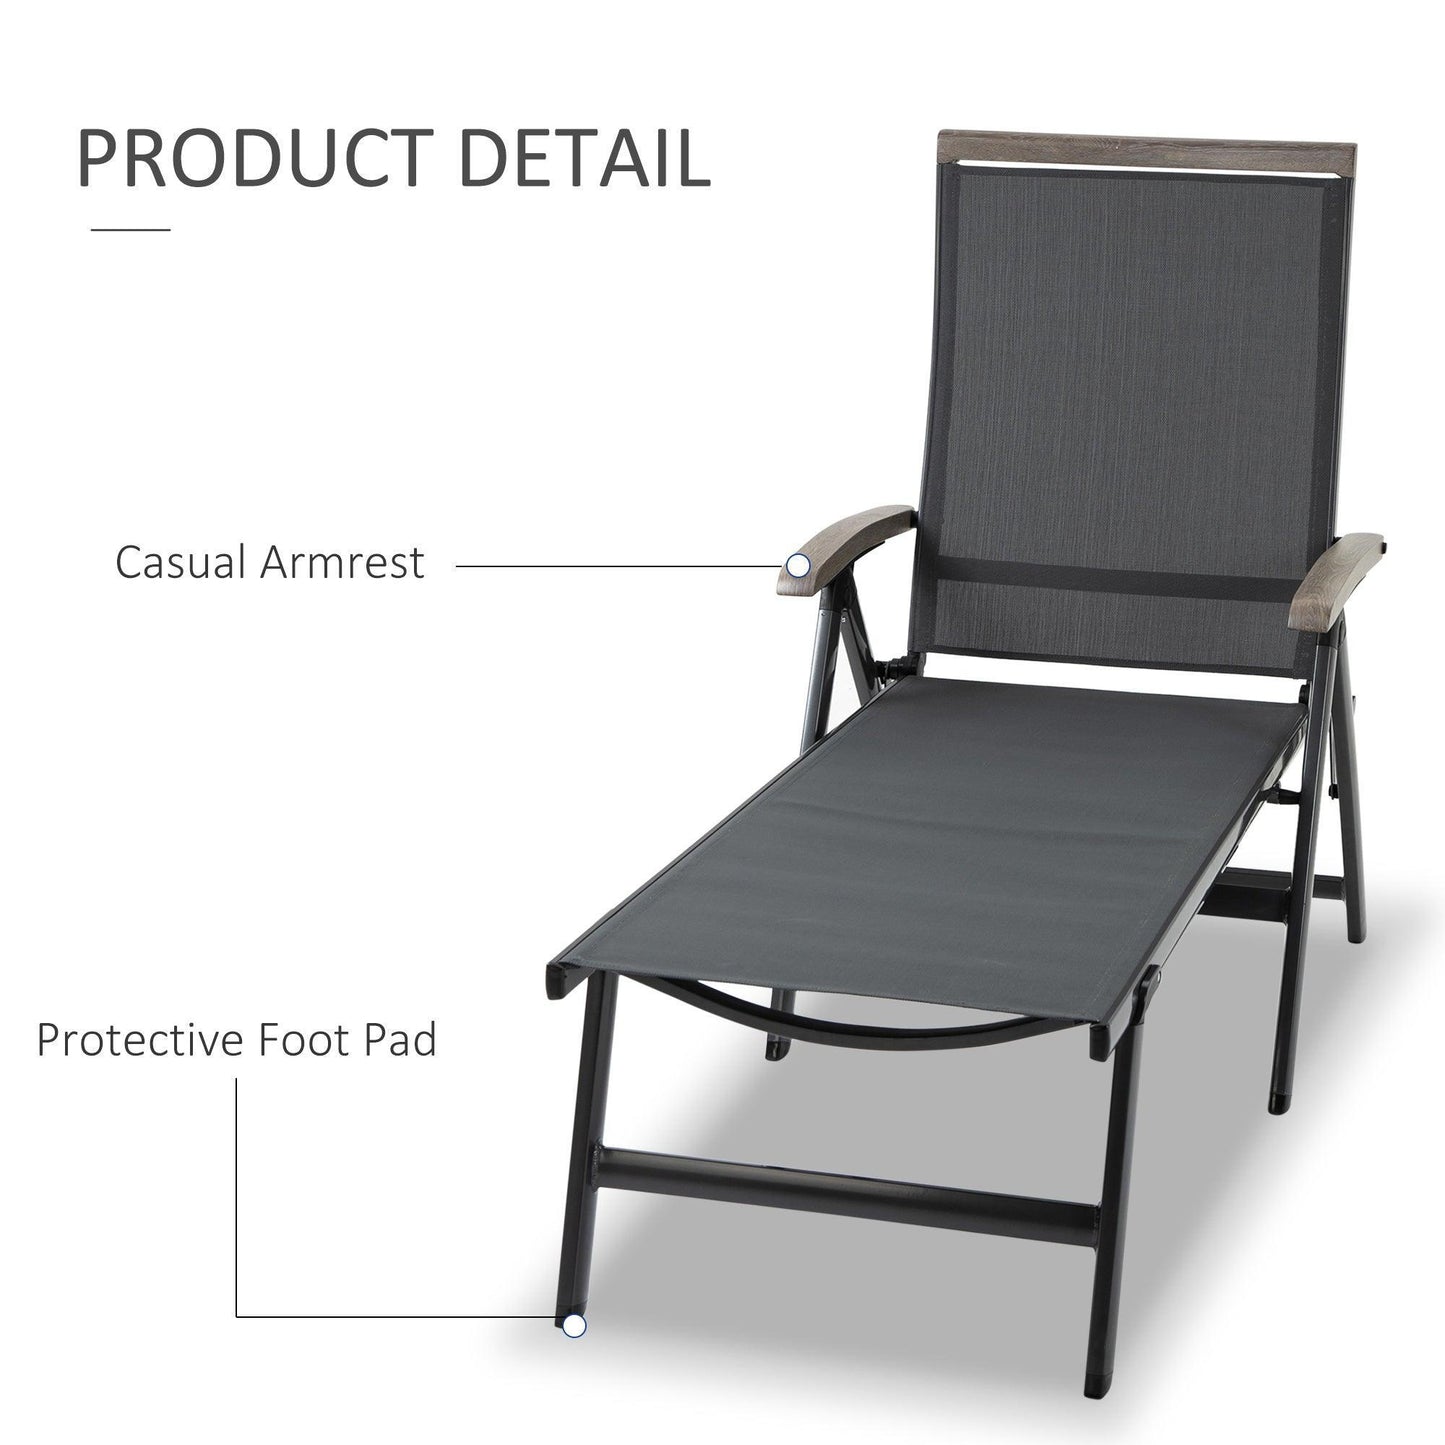 Outsunny Outdoor Folding Sun Lounger - Adjustable Chaise Lounge Chair - ALL4U RETAILER LTD